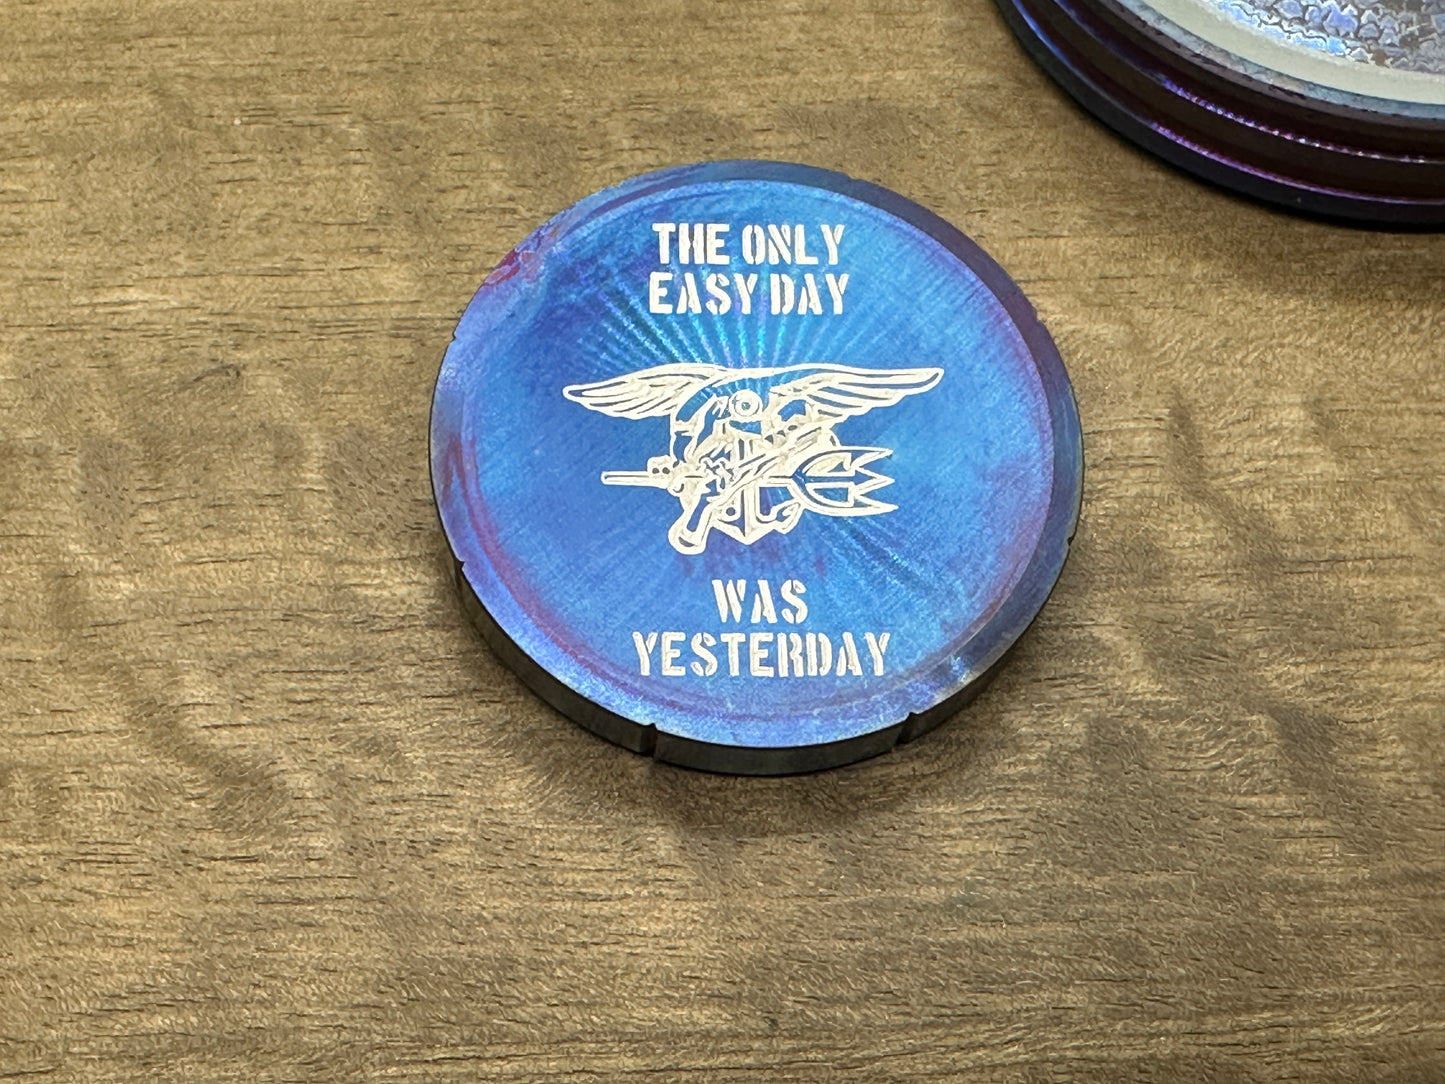 "The only easy day was yesterday.” Flamed Stainless Steel Spinning Worry Coin